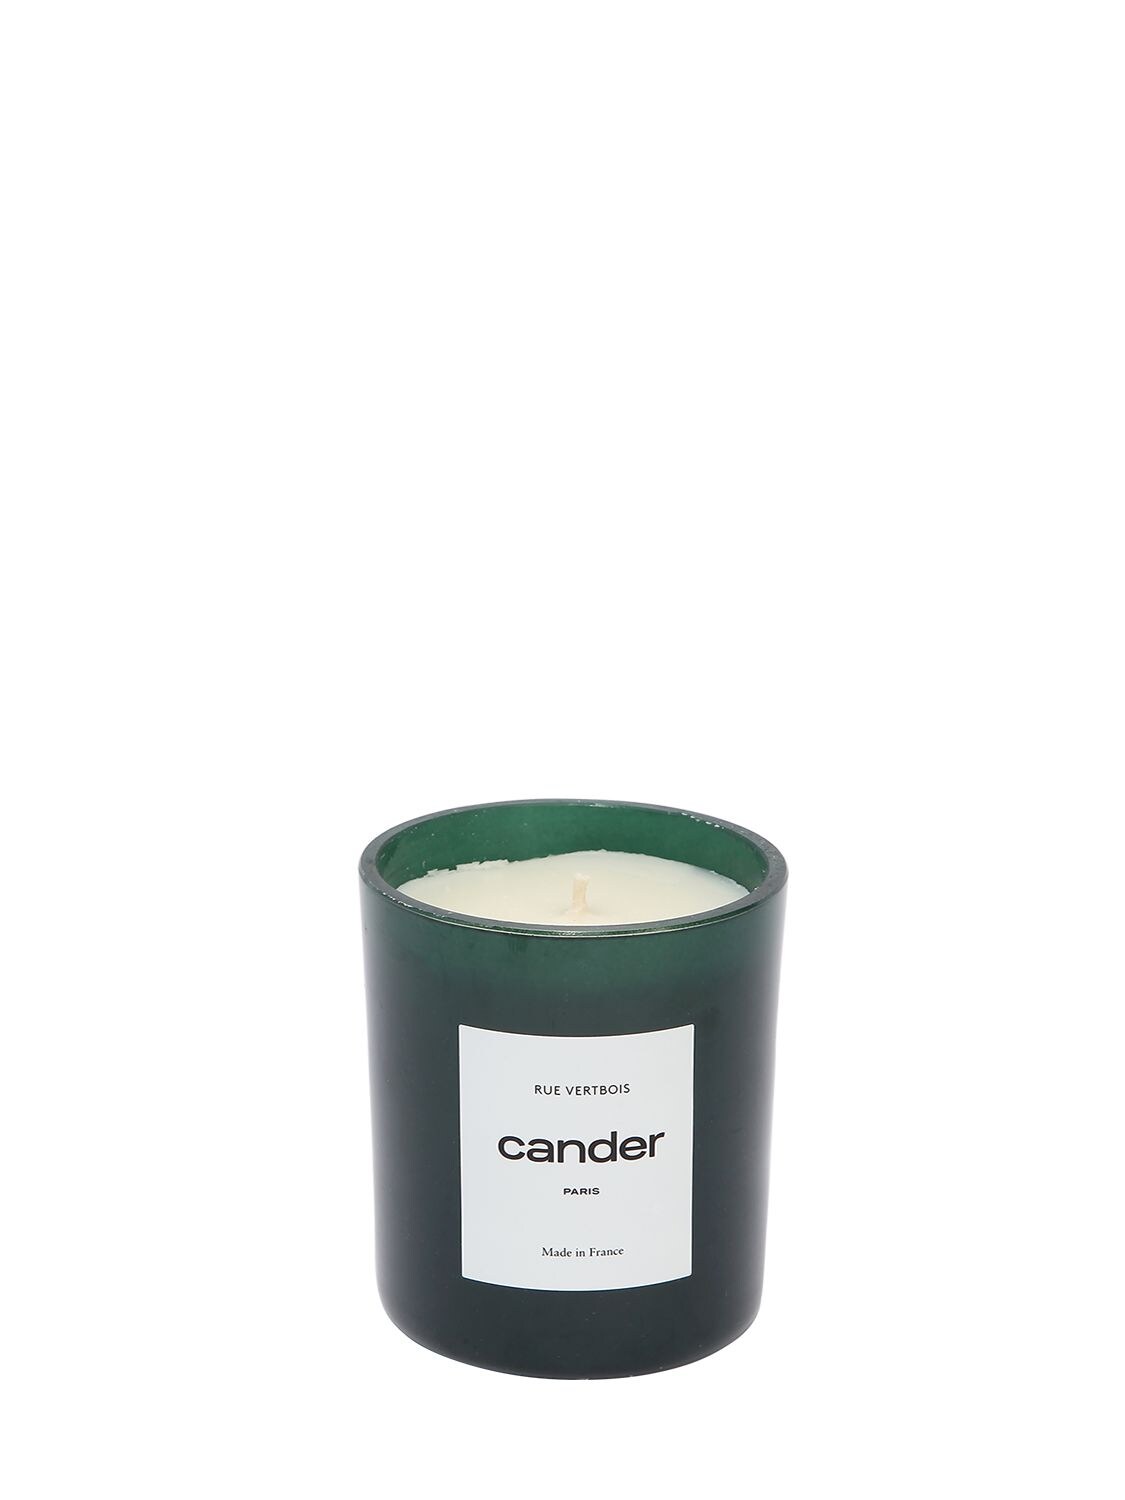 Cander Paris Rue Vertbois Scented Candle In Green